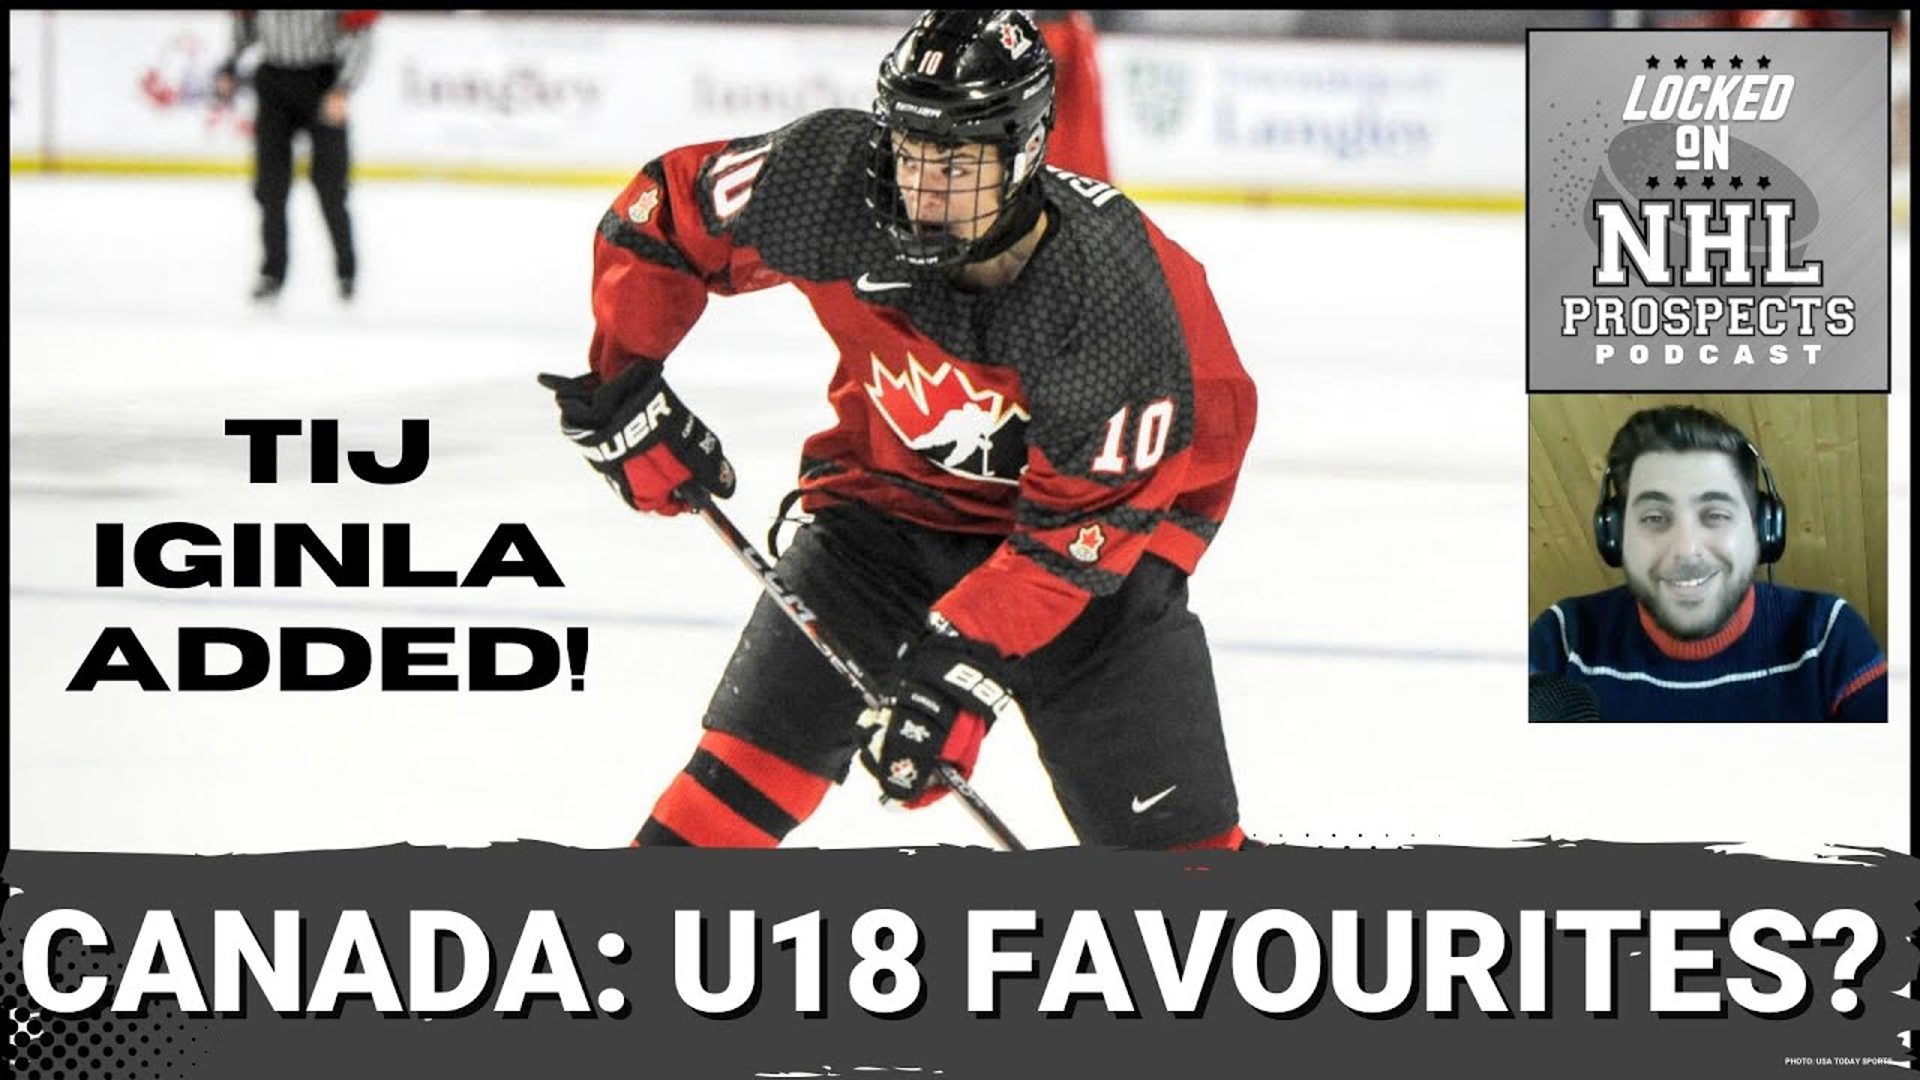 In this episode, Hadi breaks down the Team Canada roster for the upcoming U18 World Championships!